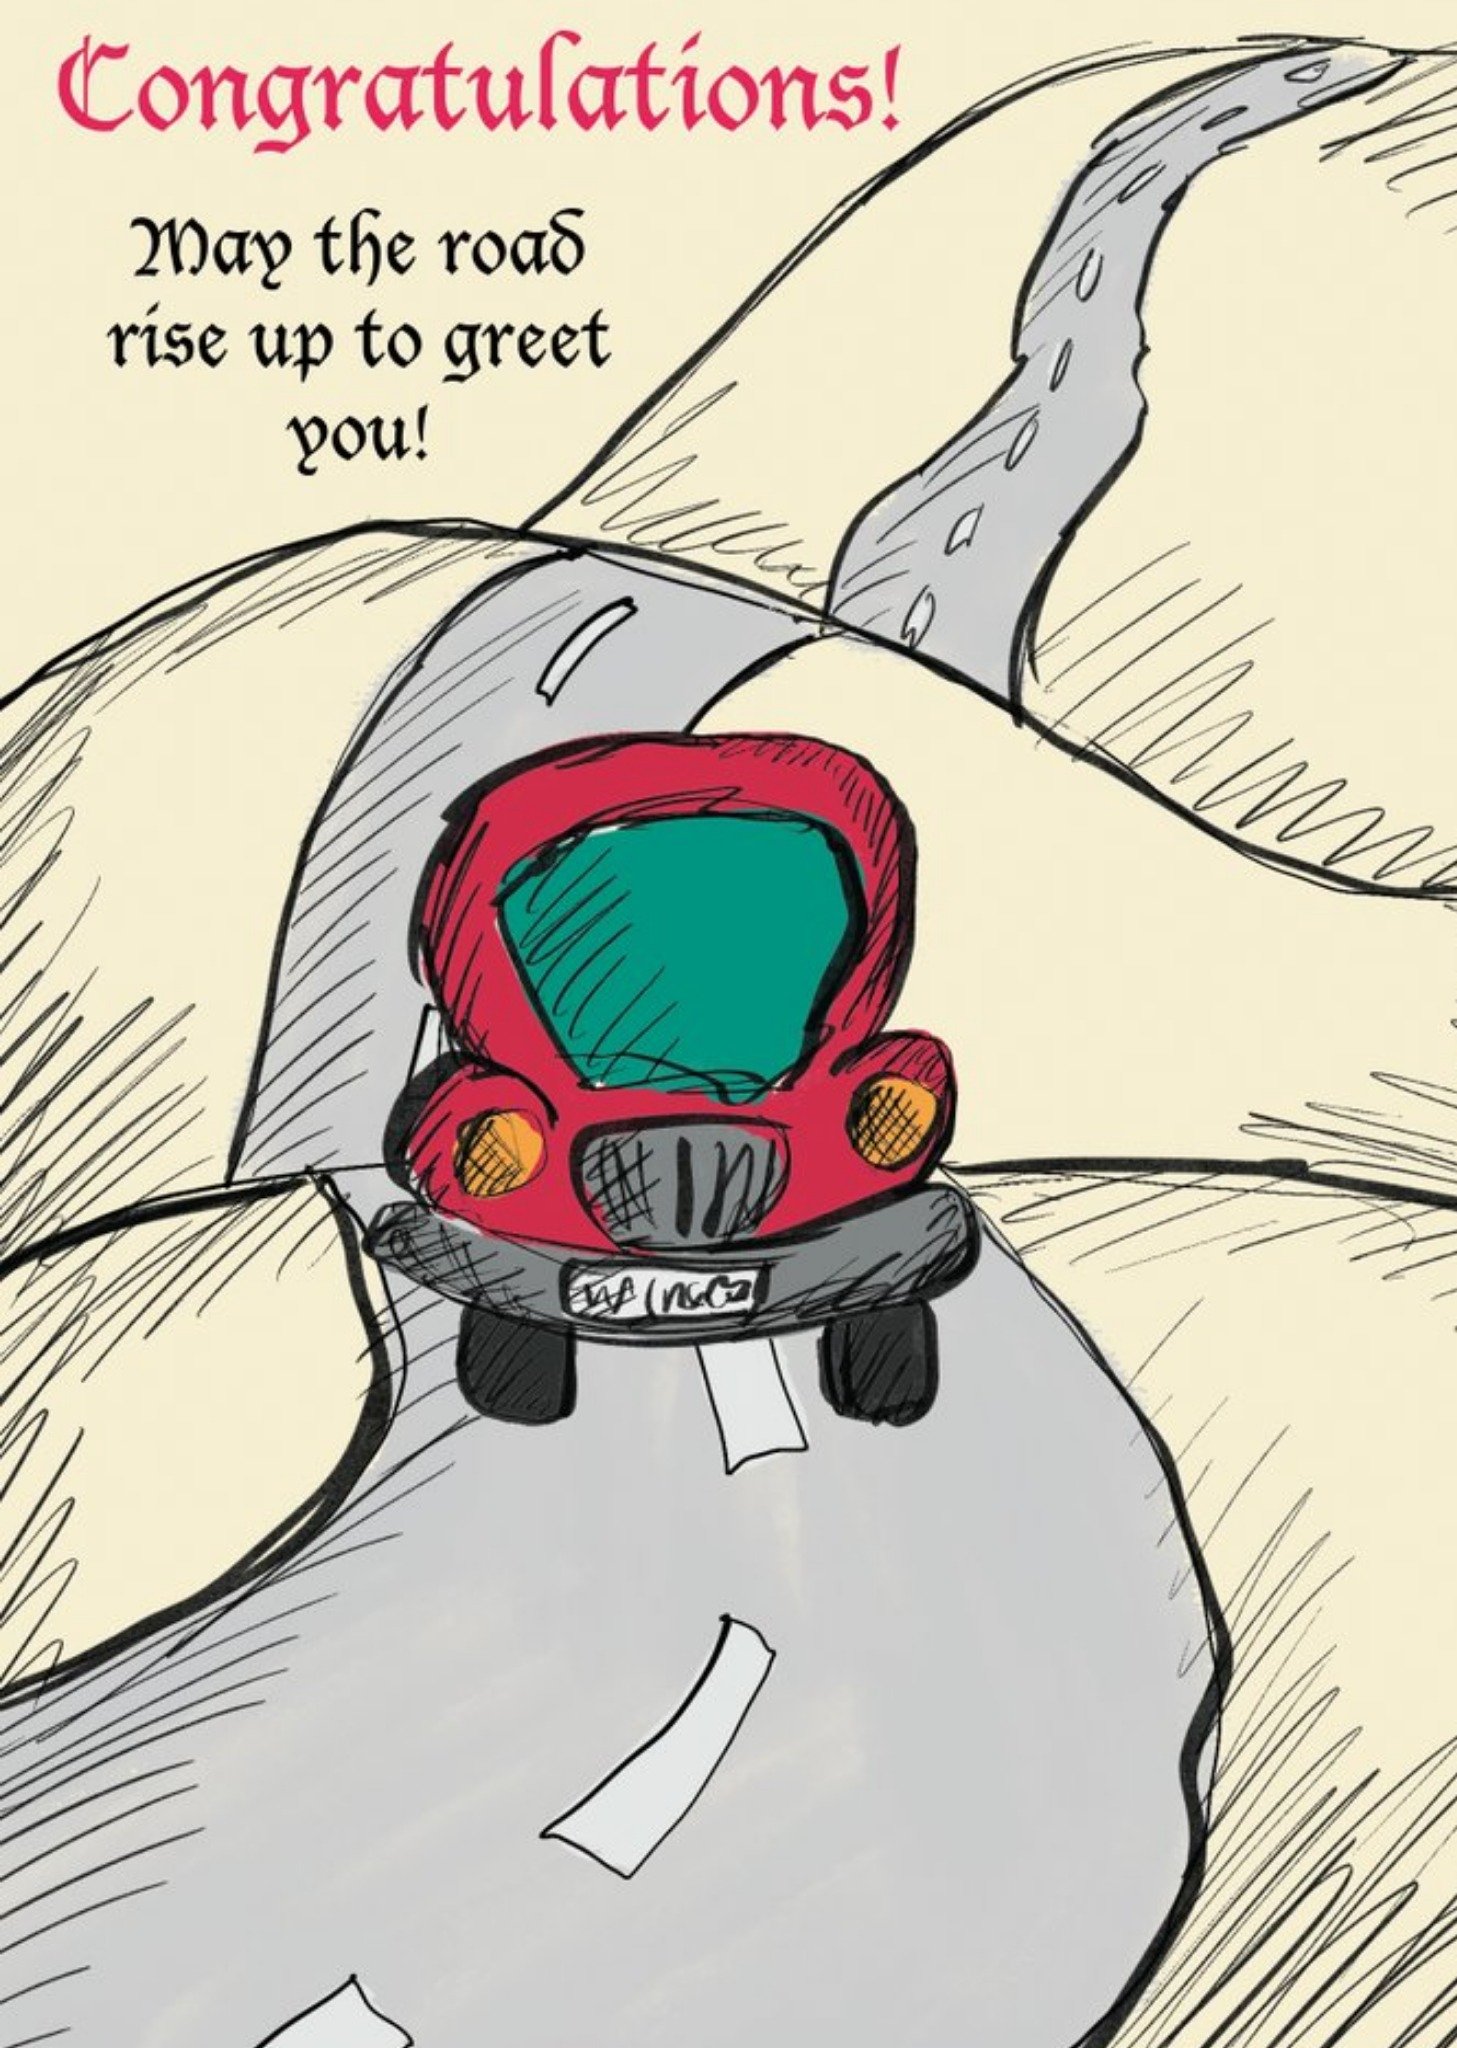 Moonpig Poet And Painter Illustrated Car On Rising Road Congratulations Card, Large